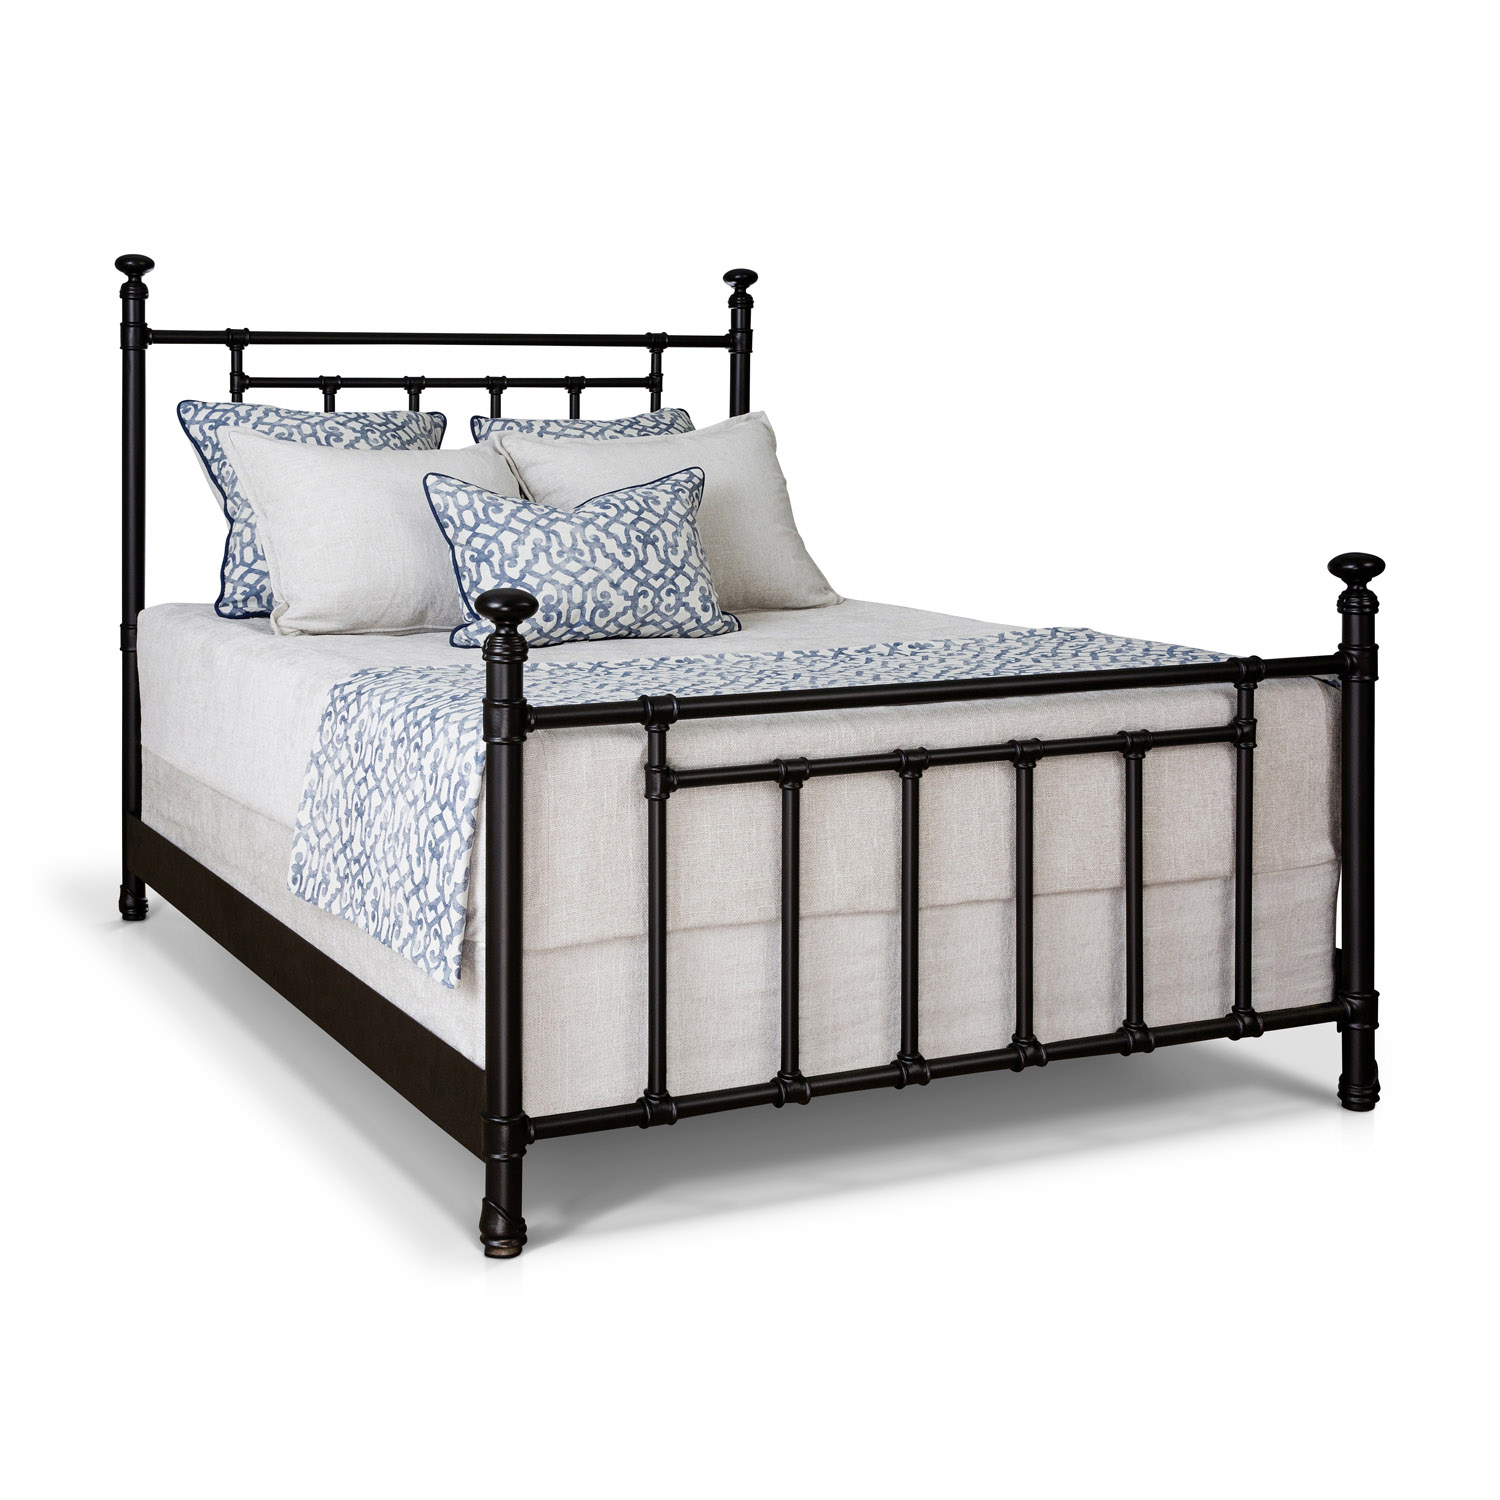 a black metal bed frame with white pillows